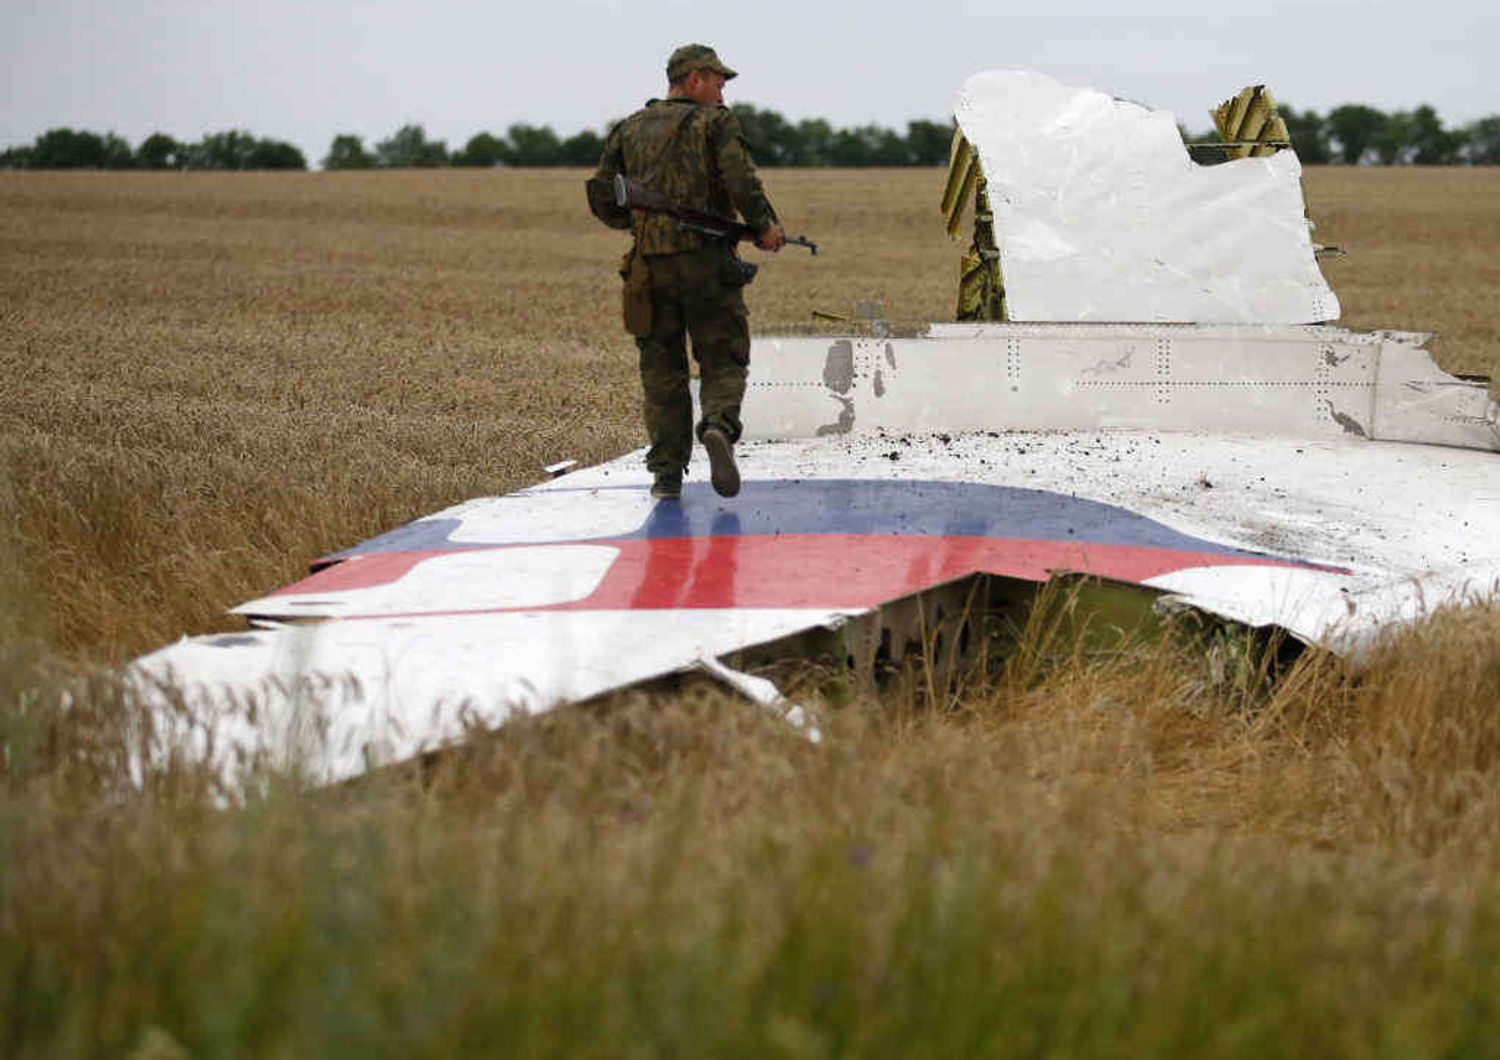 Russia offers 'complete assistance' in plane crash inquiry